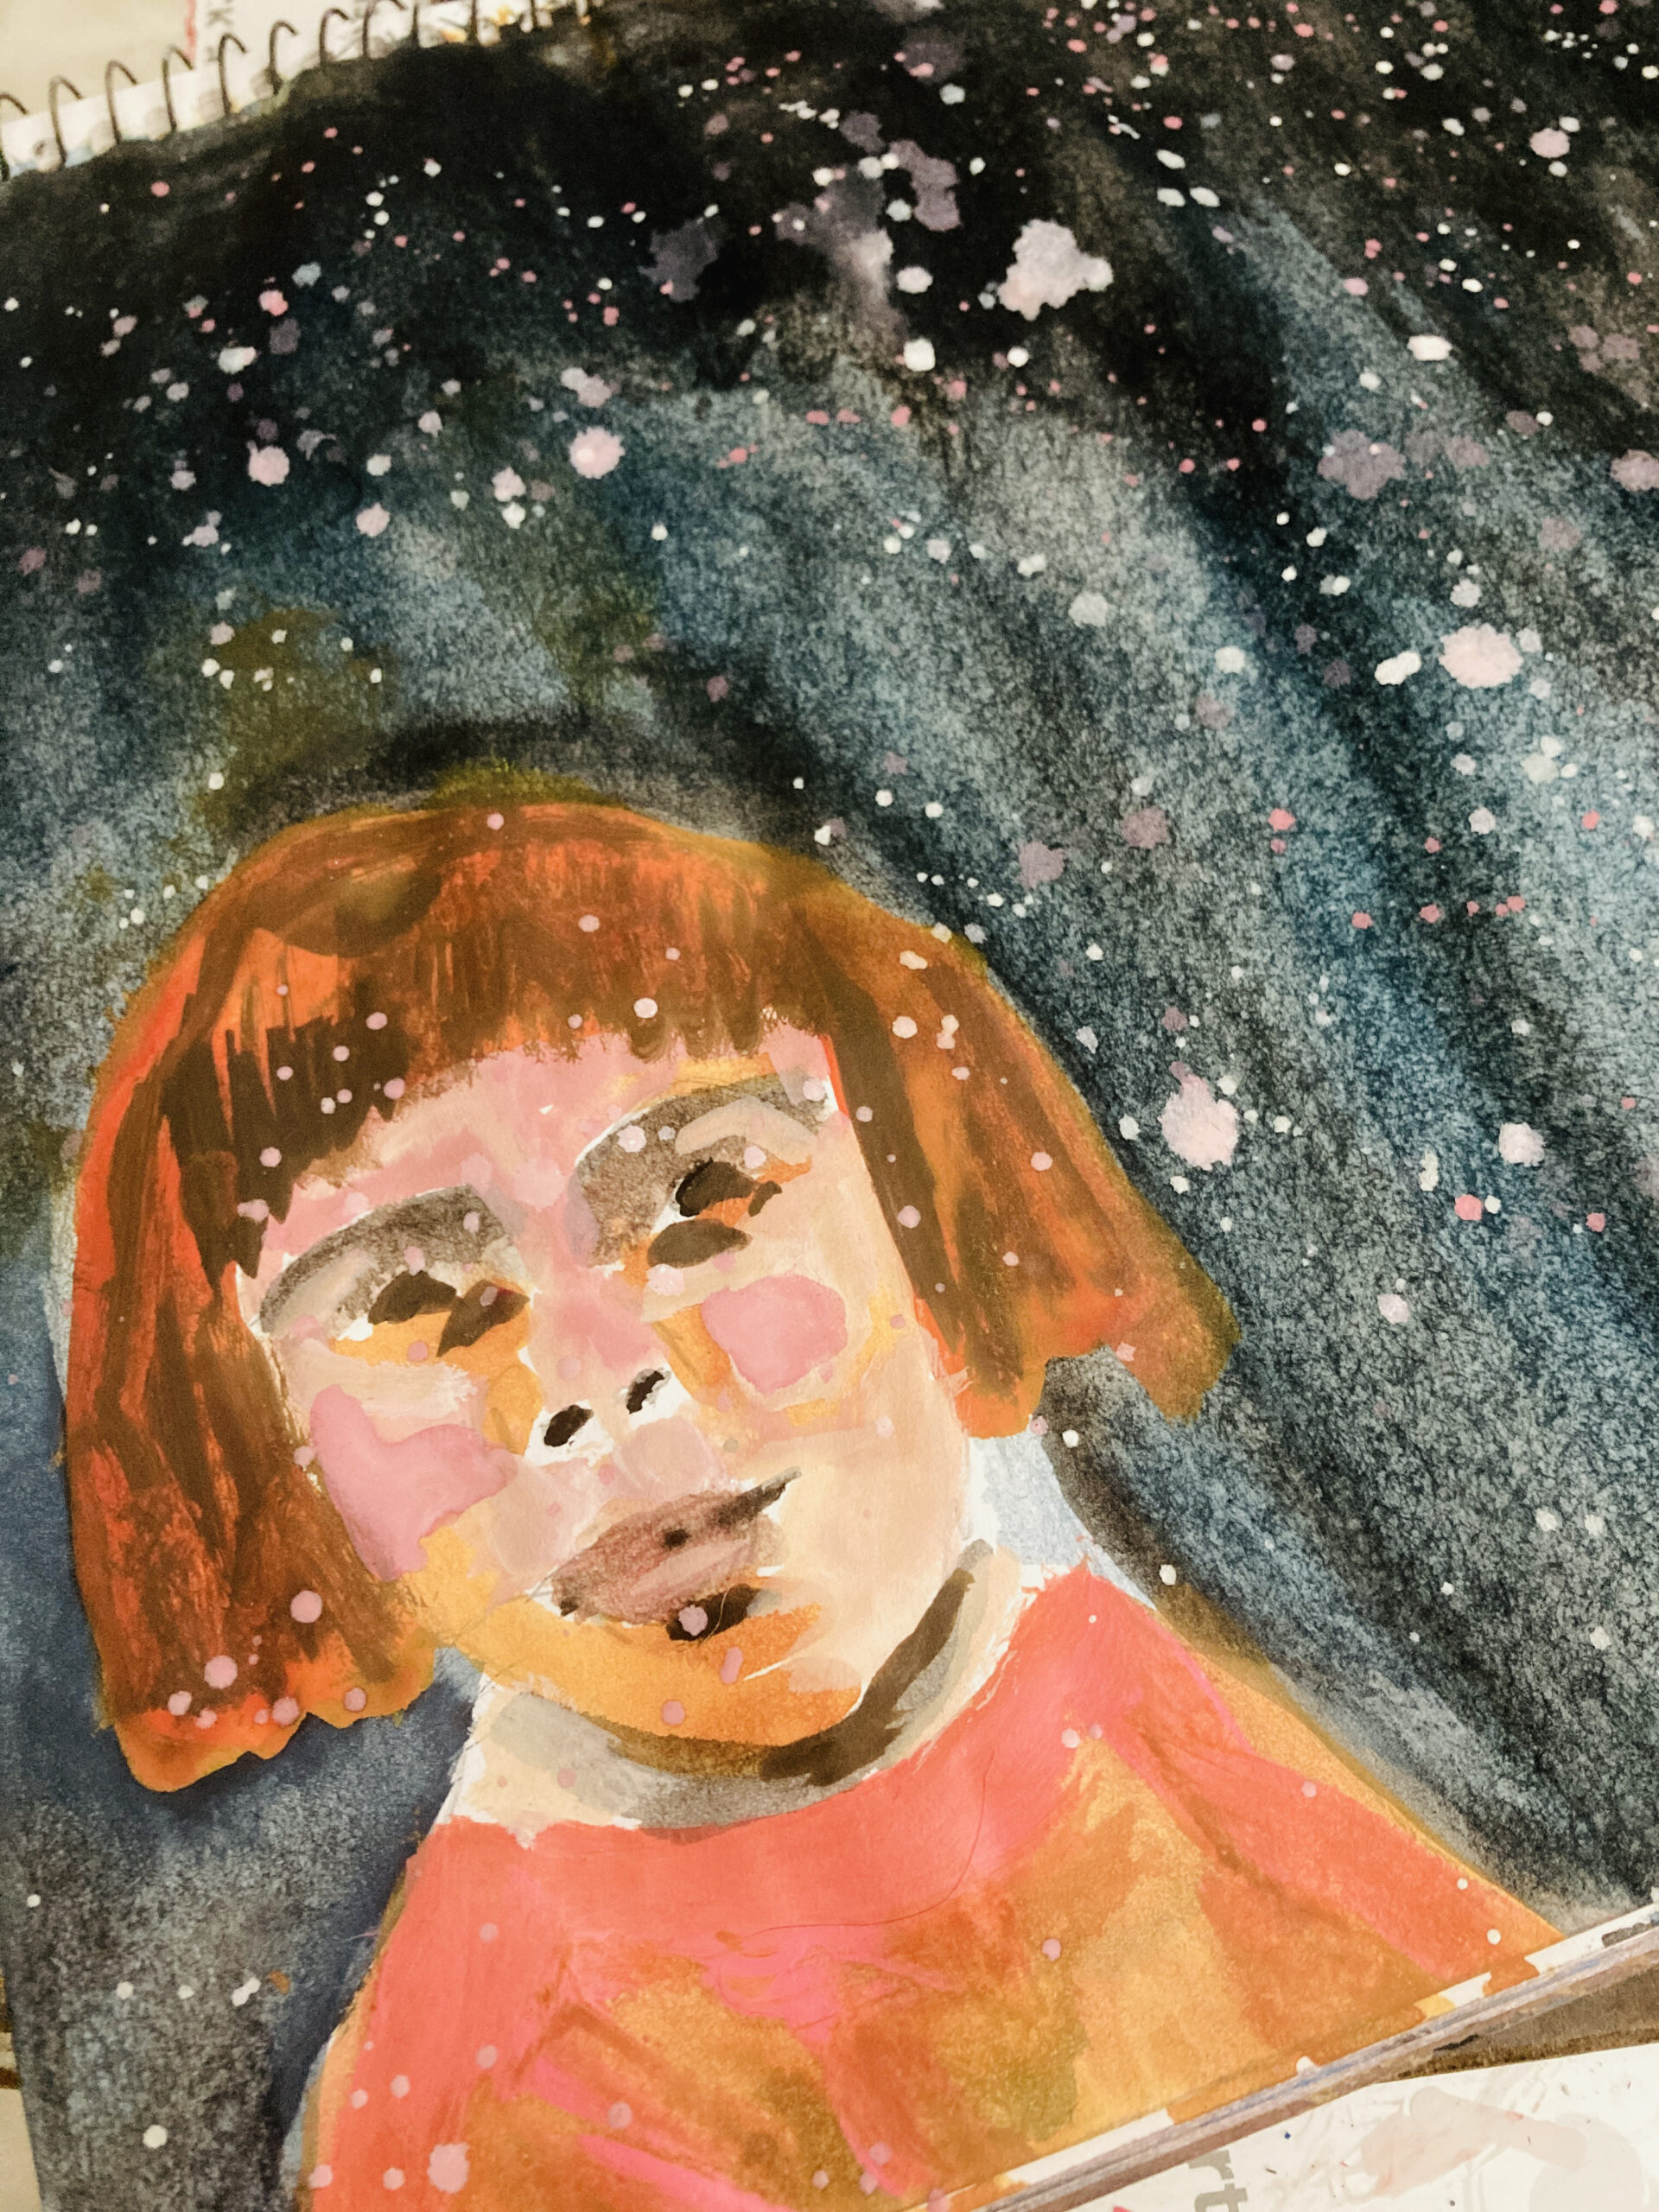 Painting a little girl in a snowstorm in my art journal